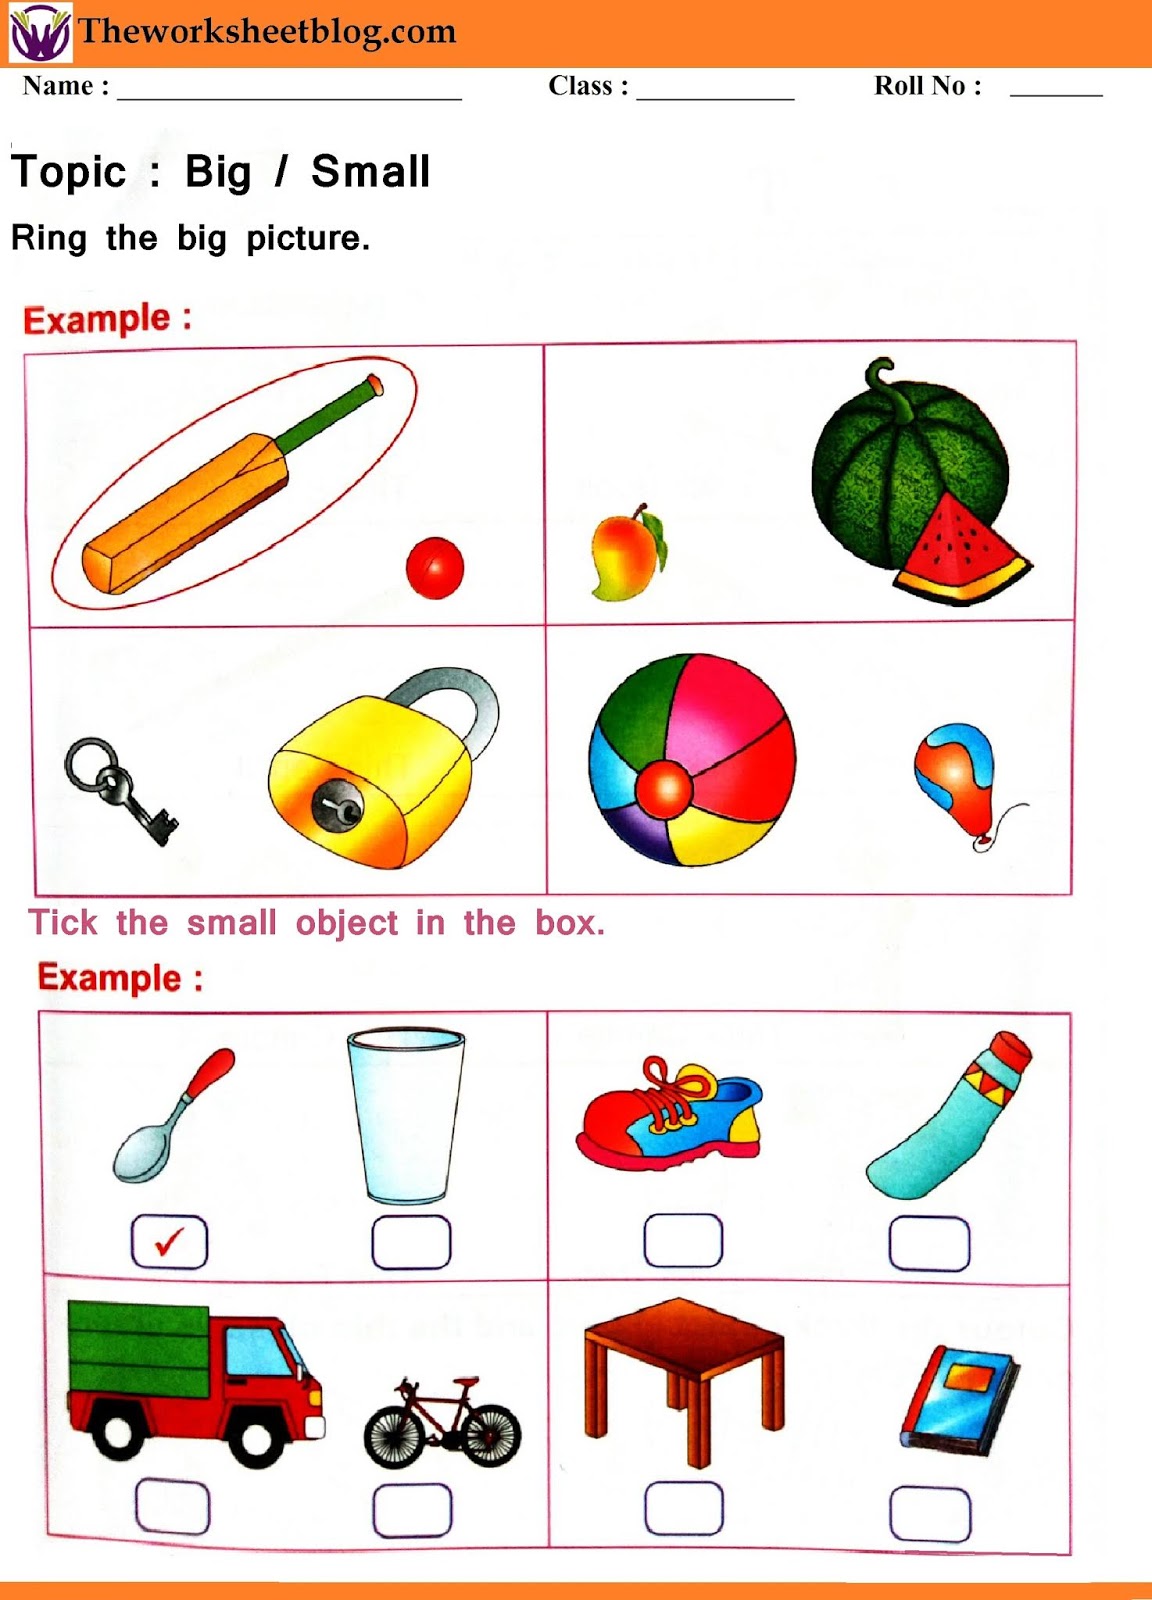 big-vs-small-size-comparison-worksheets-for-preschool-and-kindergarten-k5-learning-big-and